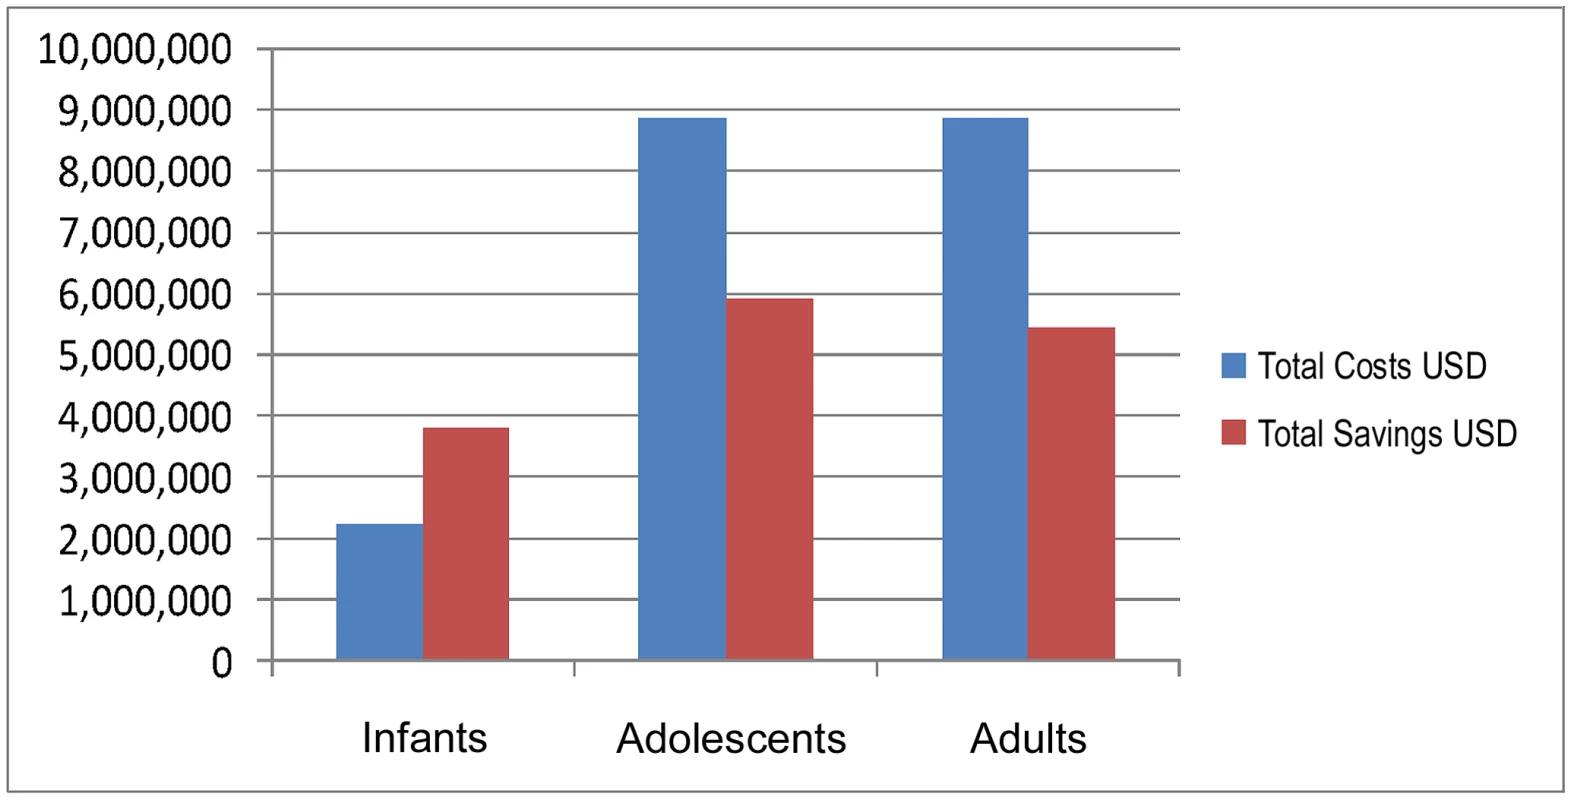 Total costs and savings for neonatal, adolescent, and adult MC (cohort 150,000 people), Rwanda, 2008.